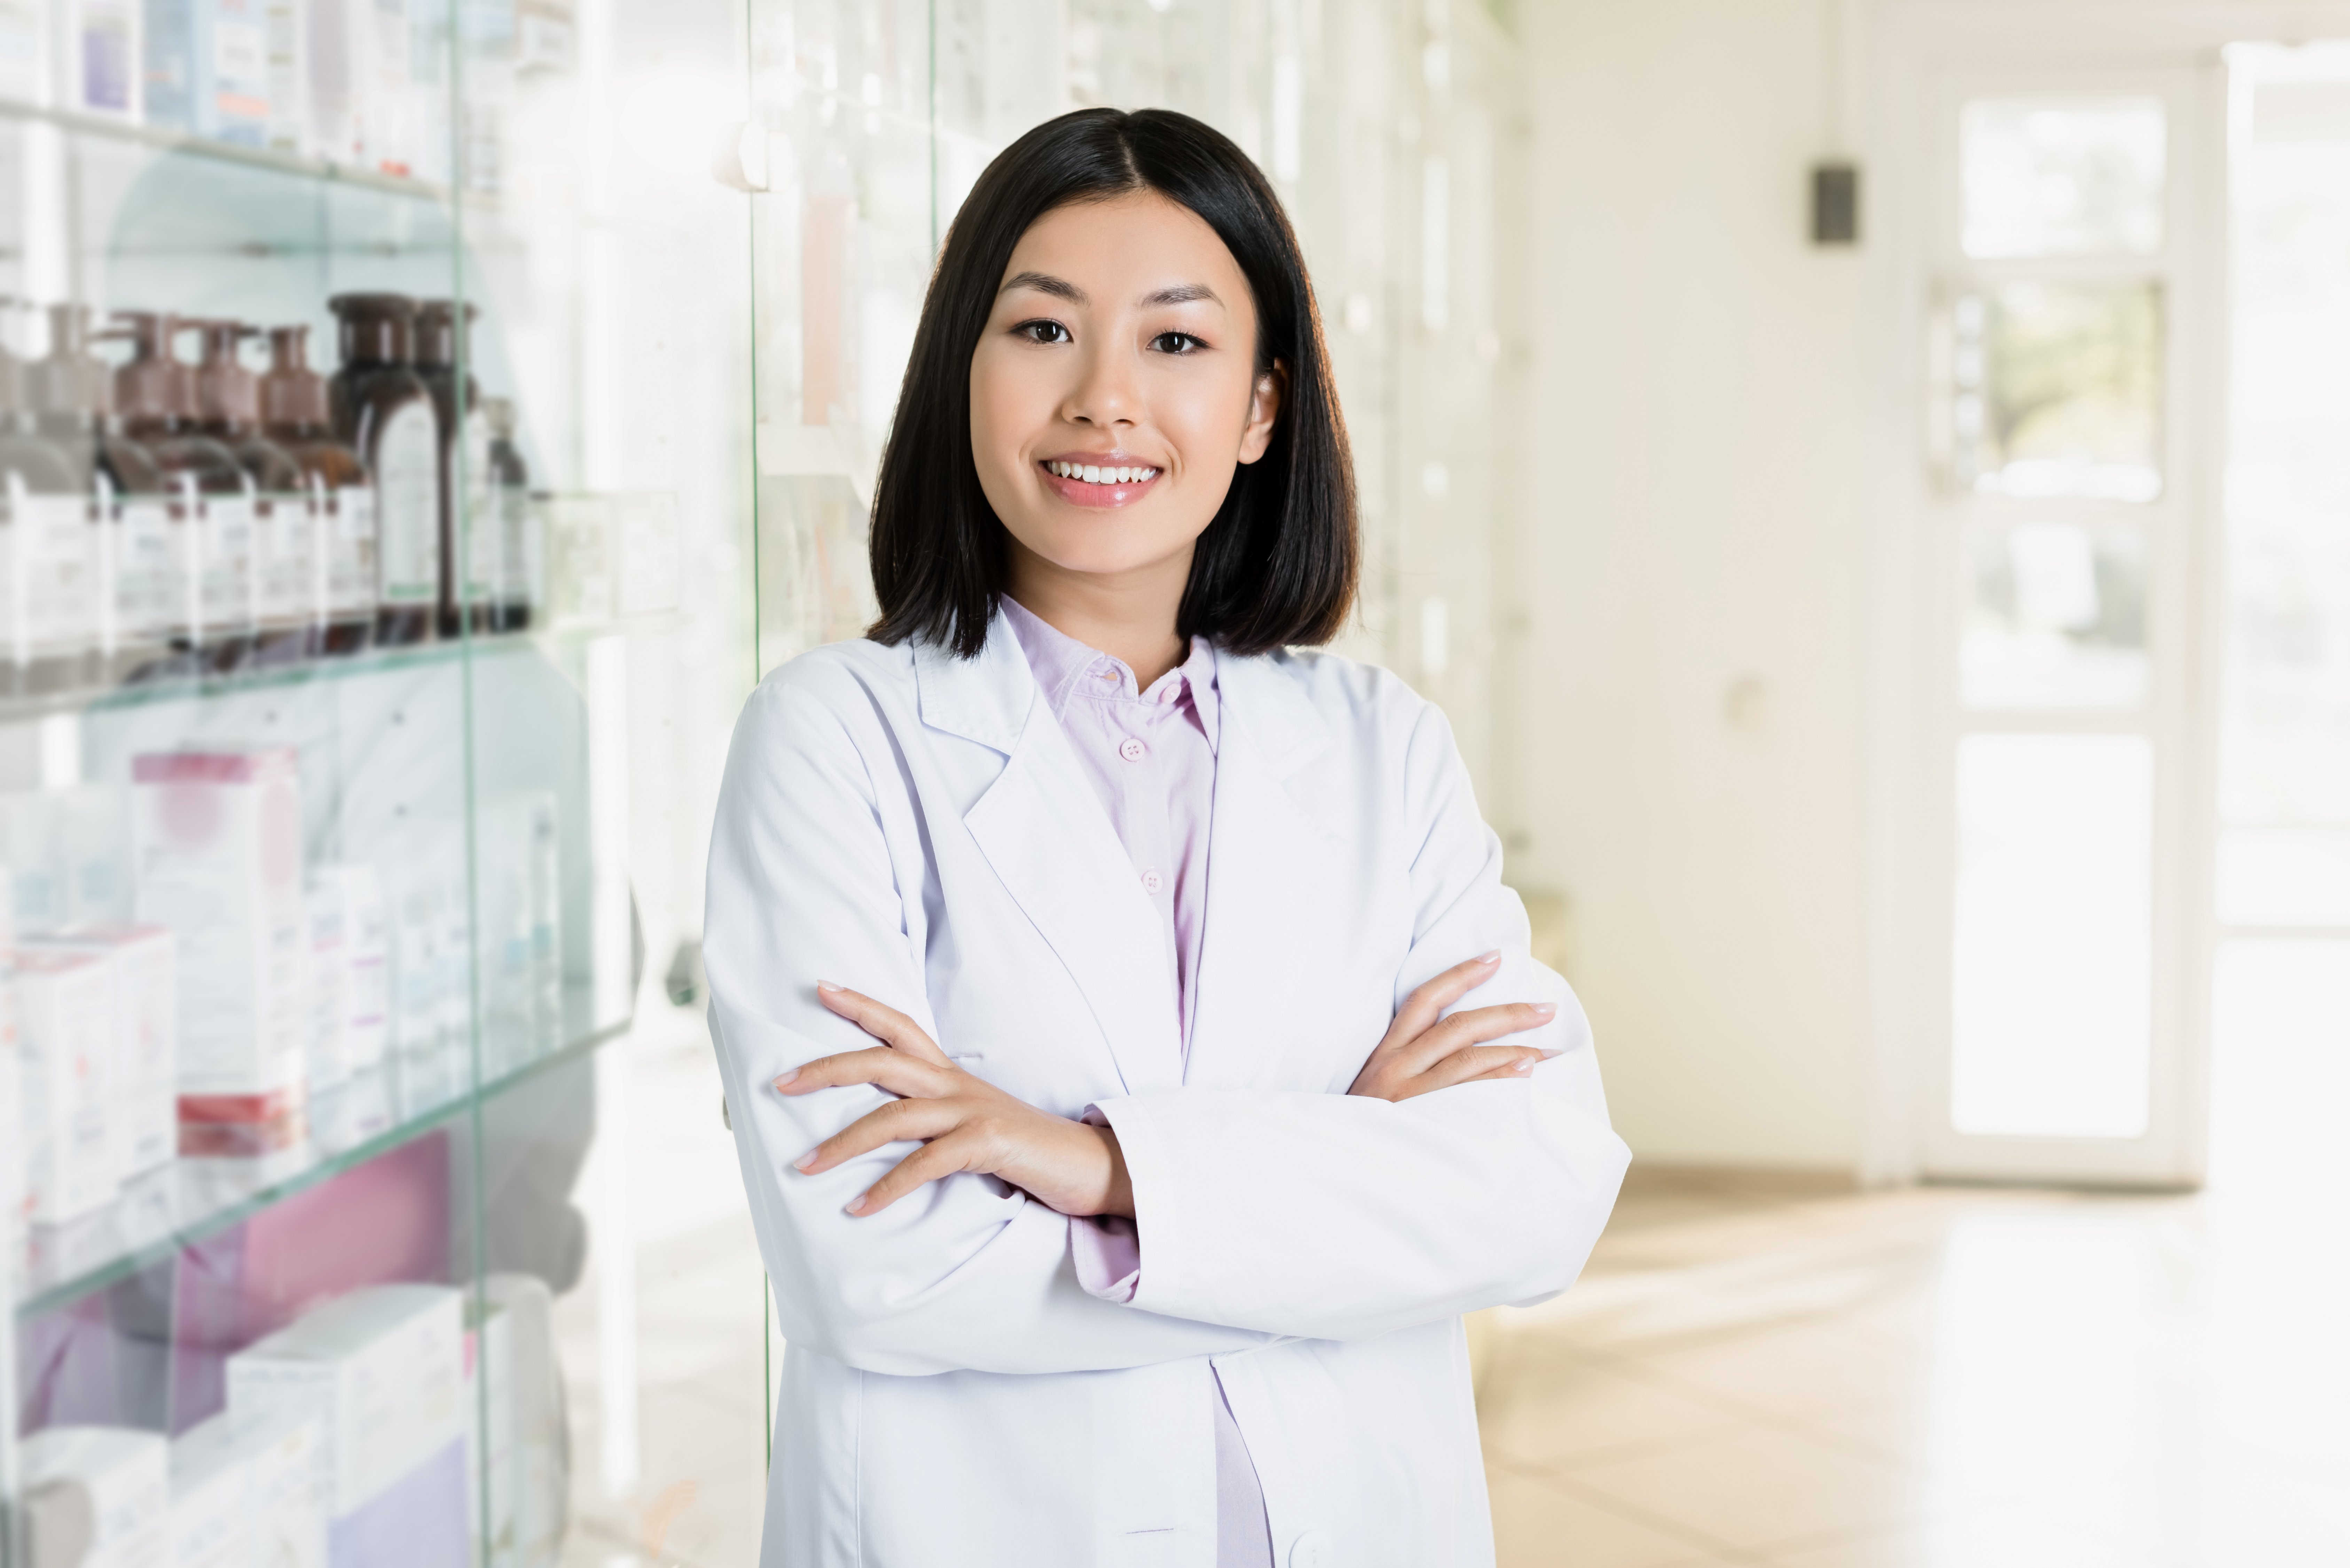 Pharmacist Smiling while standing in front of shelves